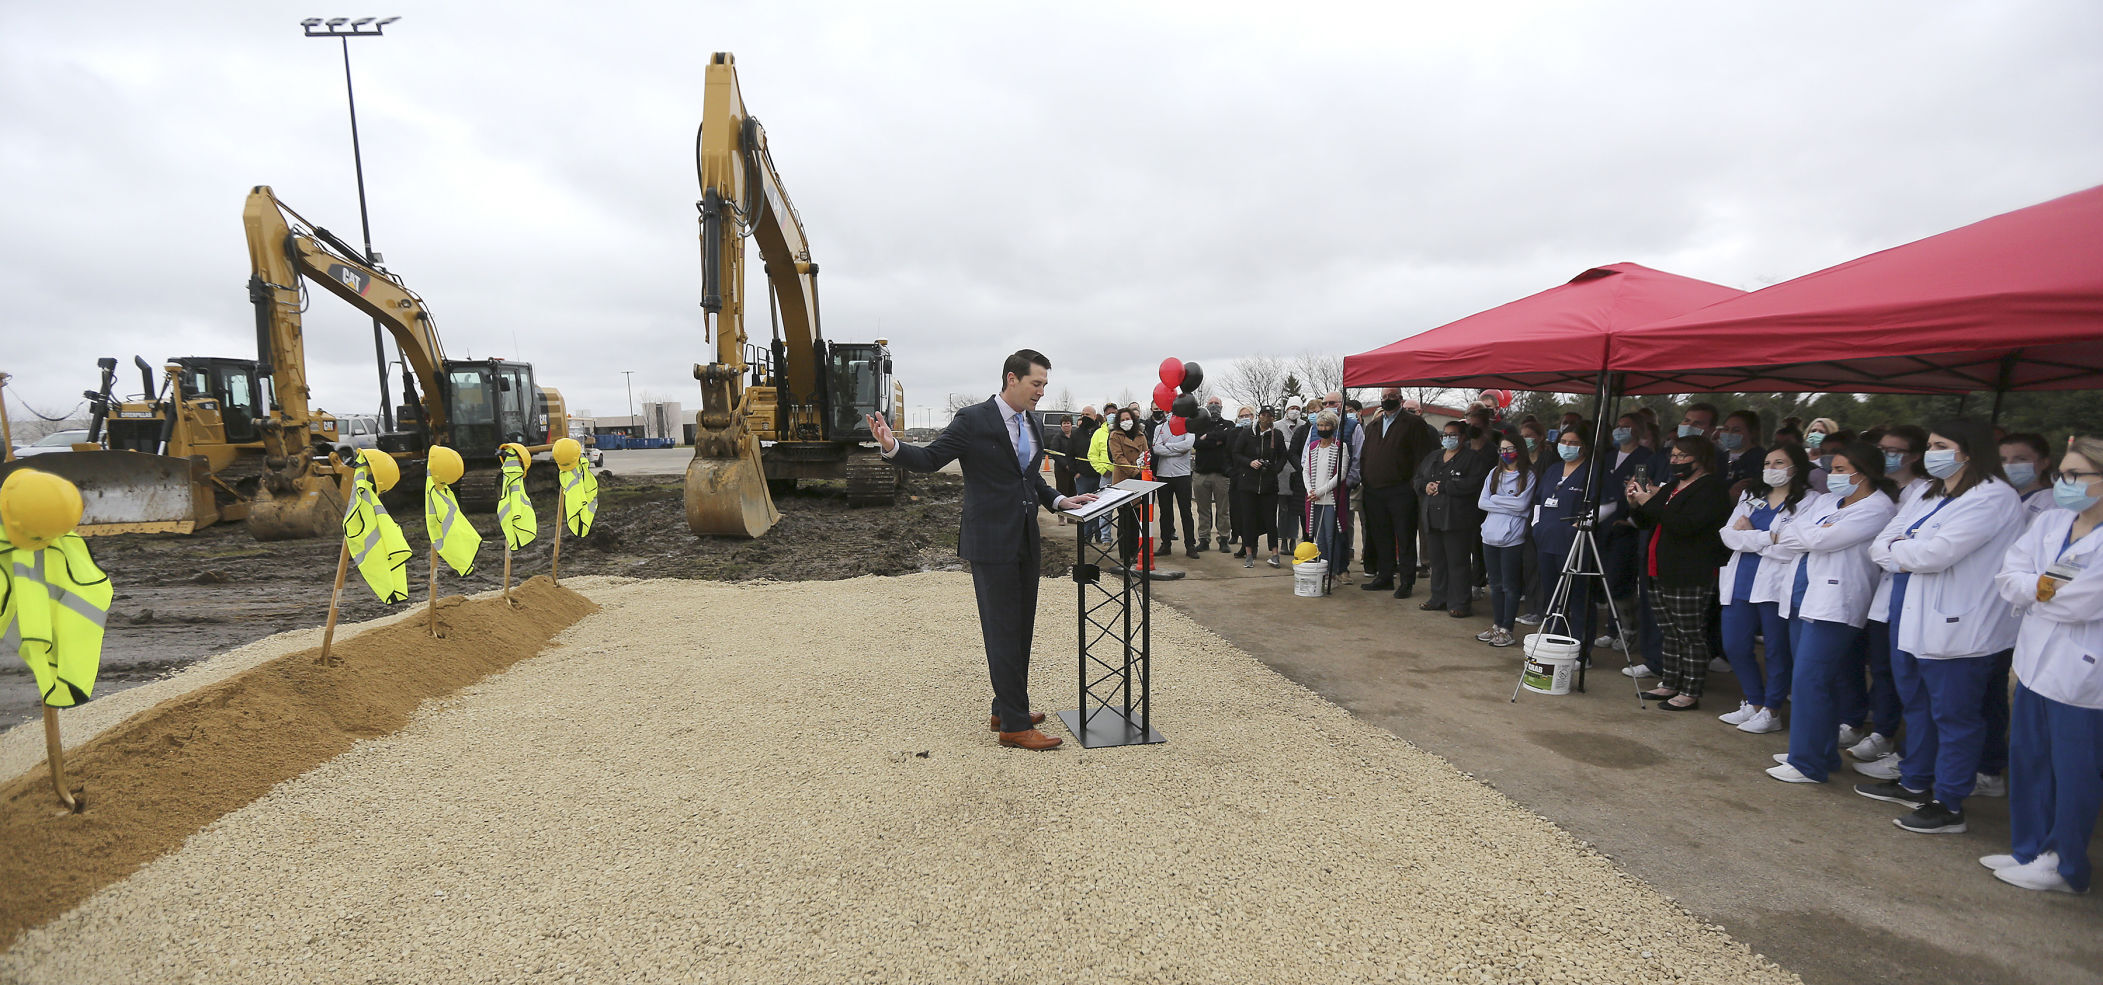 Wes Schulte, of College Suites LLC, speaks Thursday during a groundbreaking for the College Suites development that will be constructed on the edge of the Northeast Iowa Community College campus in Peosta, Iowa. PHOTO CREDIT: Dave Kettering